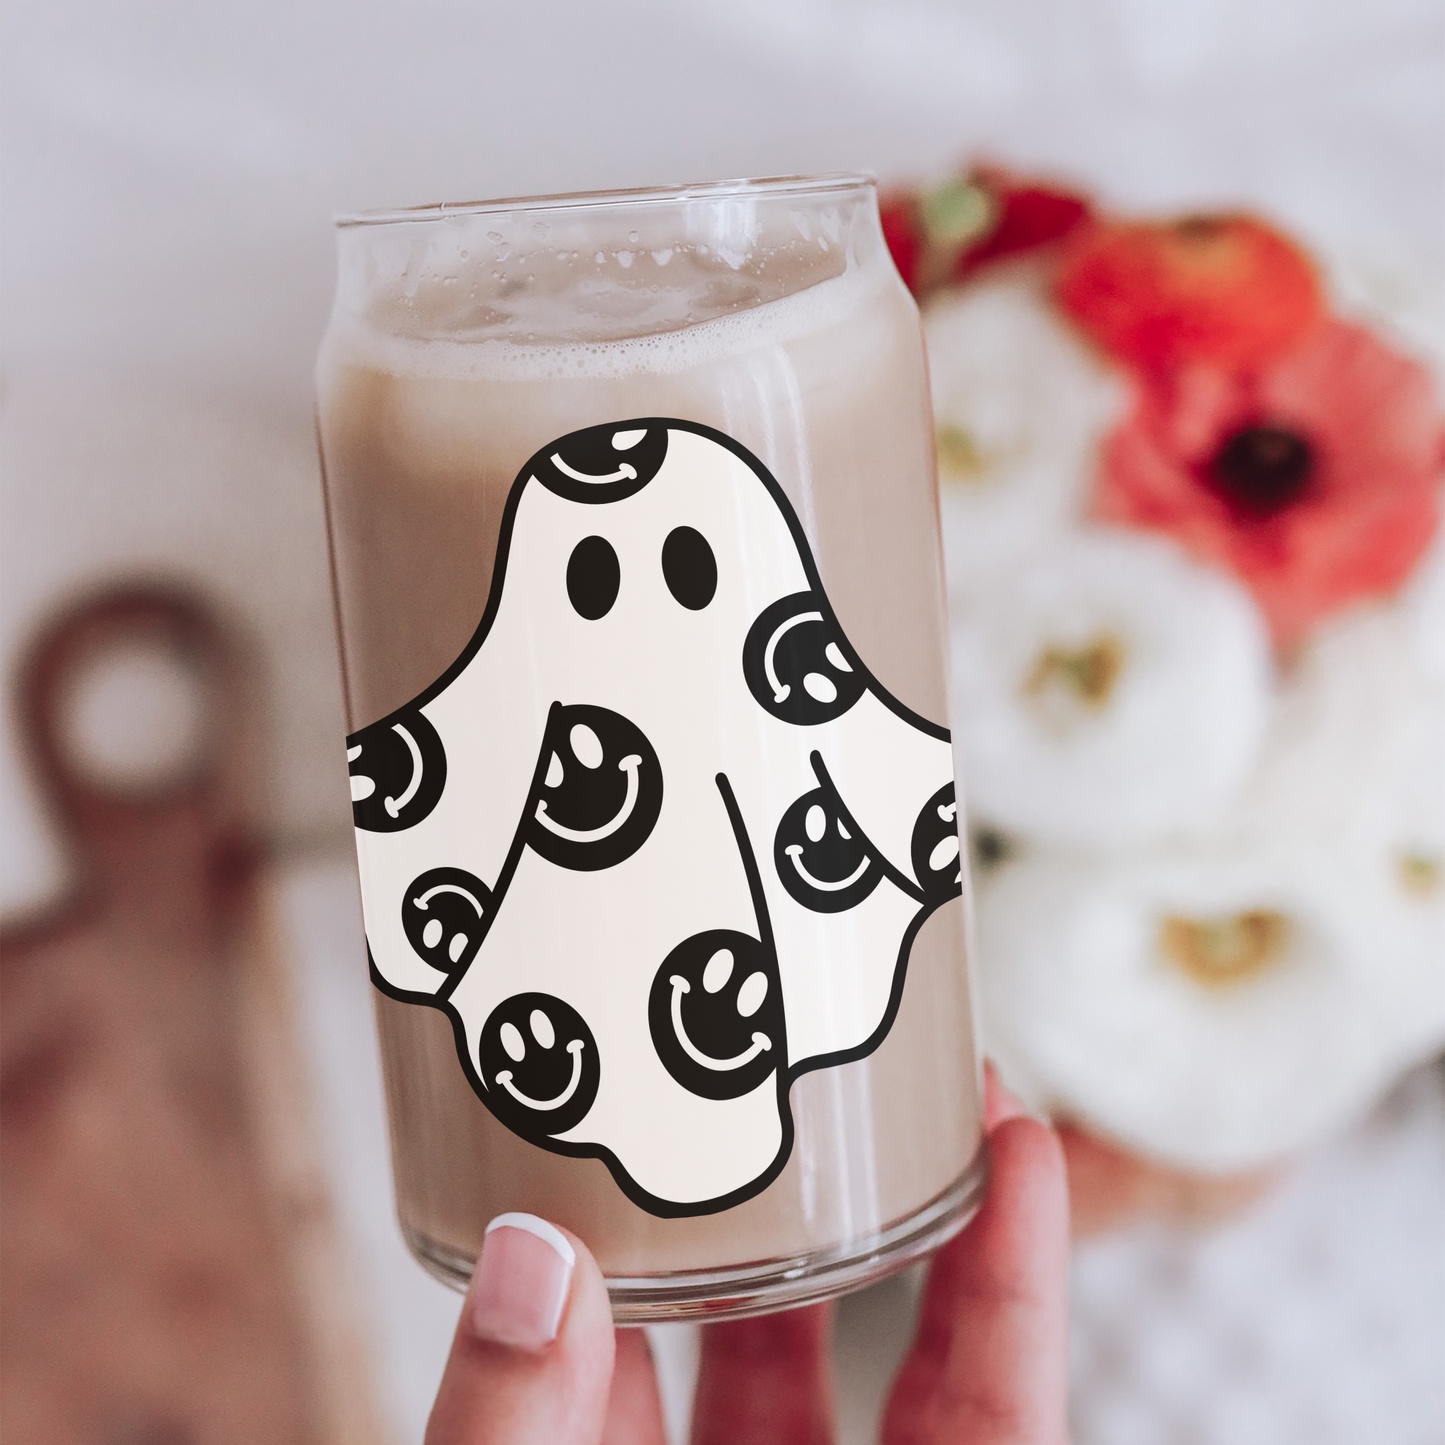 Smiley Ghostie Decal